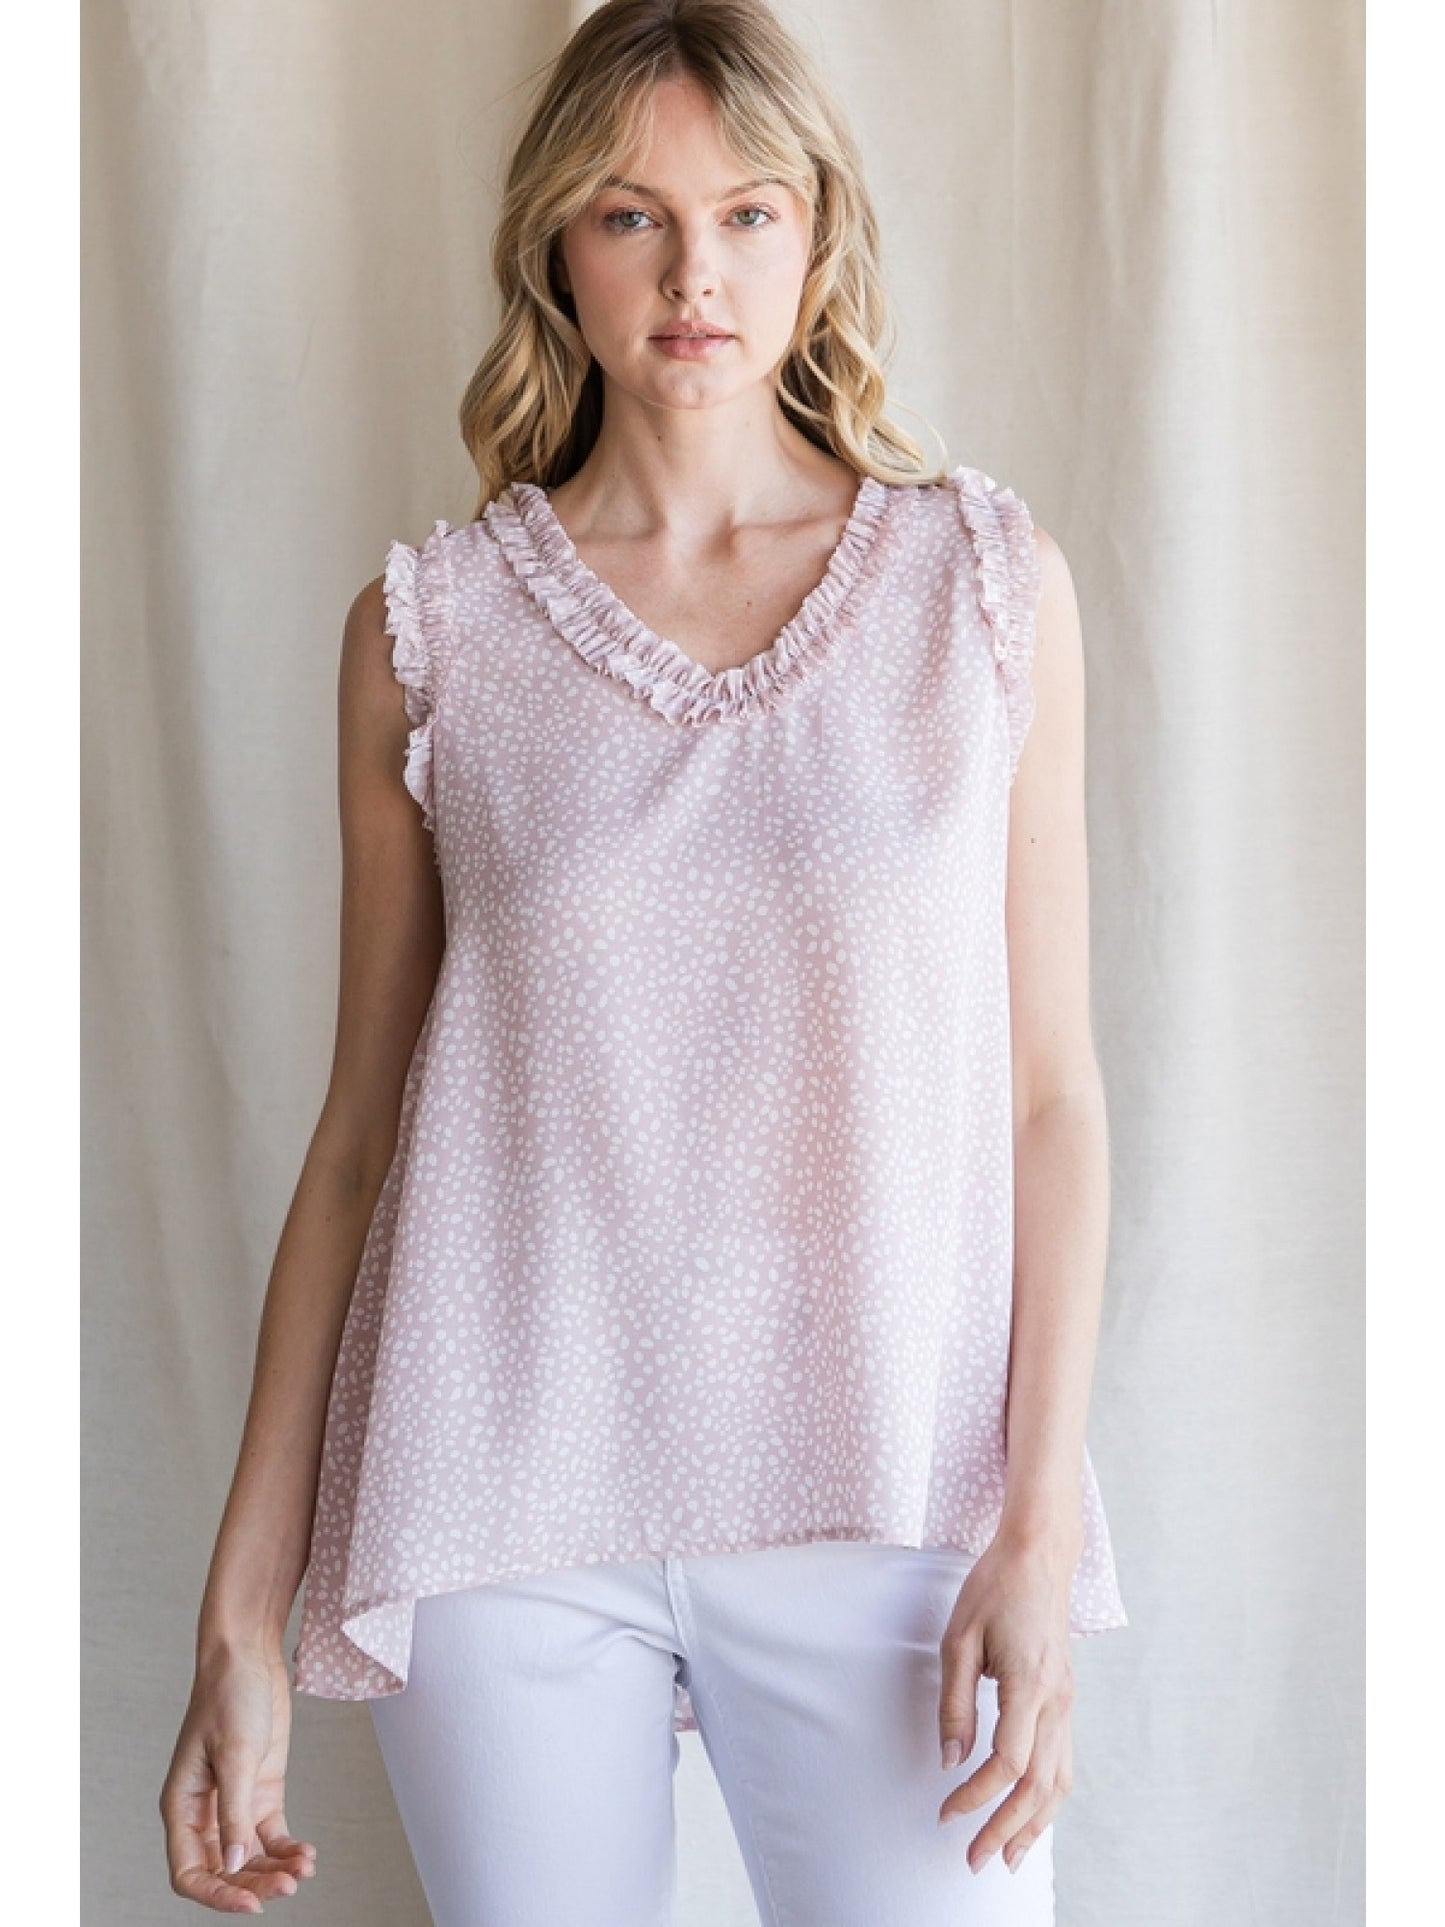 Sweet and Speckled Print Ruffle Tank